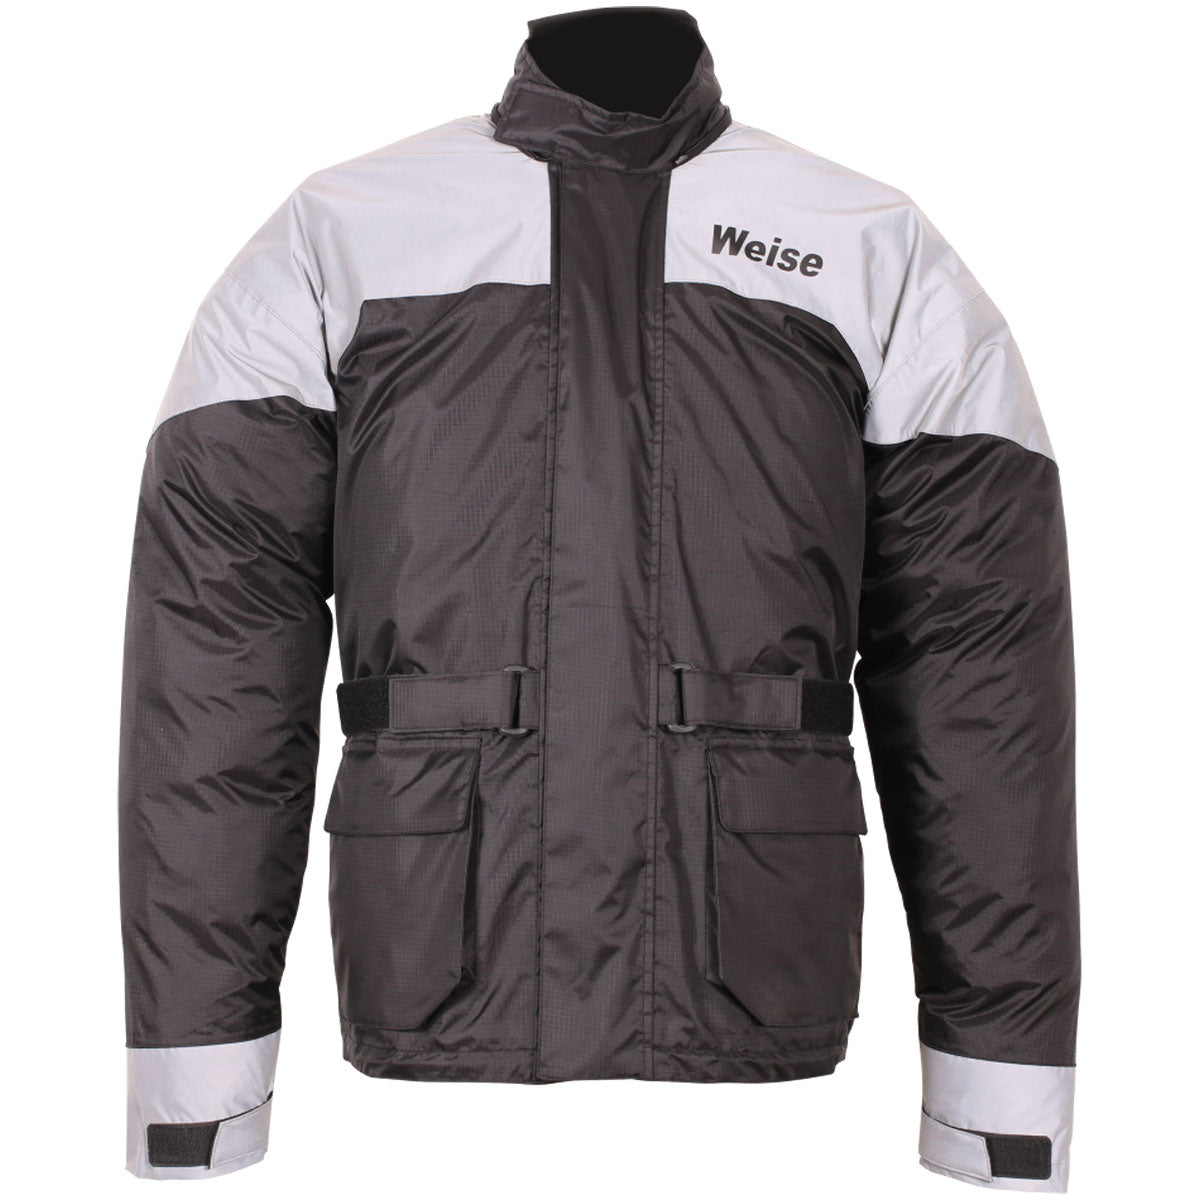 Get ready to stay dry, visible and stylish with the Weise Splash Vision Jacket! This jacket is perfect for quick commutes from home to work or anywhere else you need to go in a hurry.